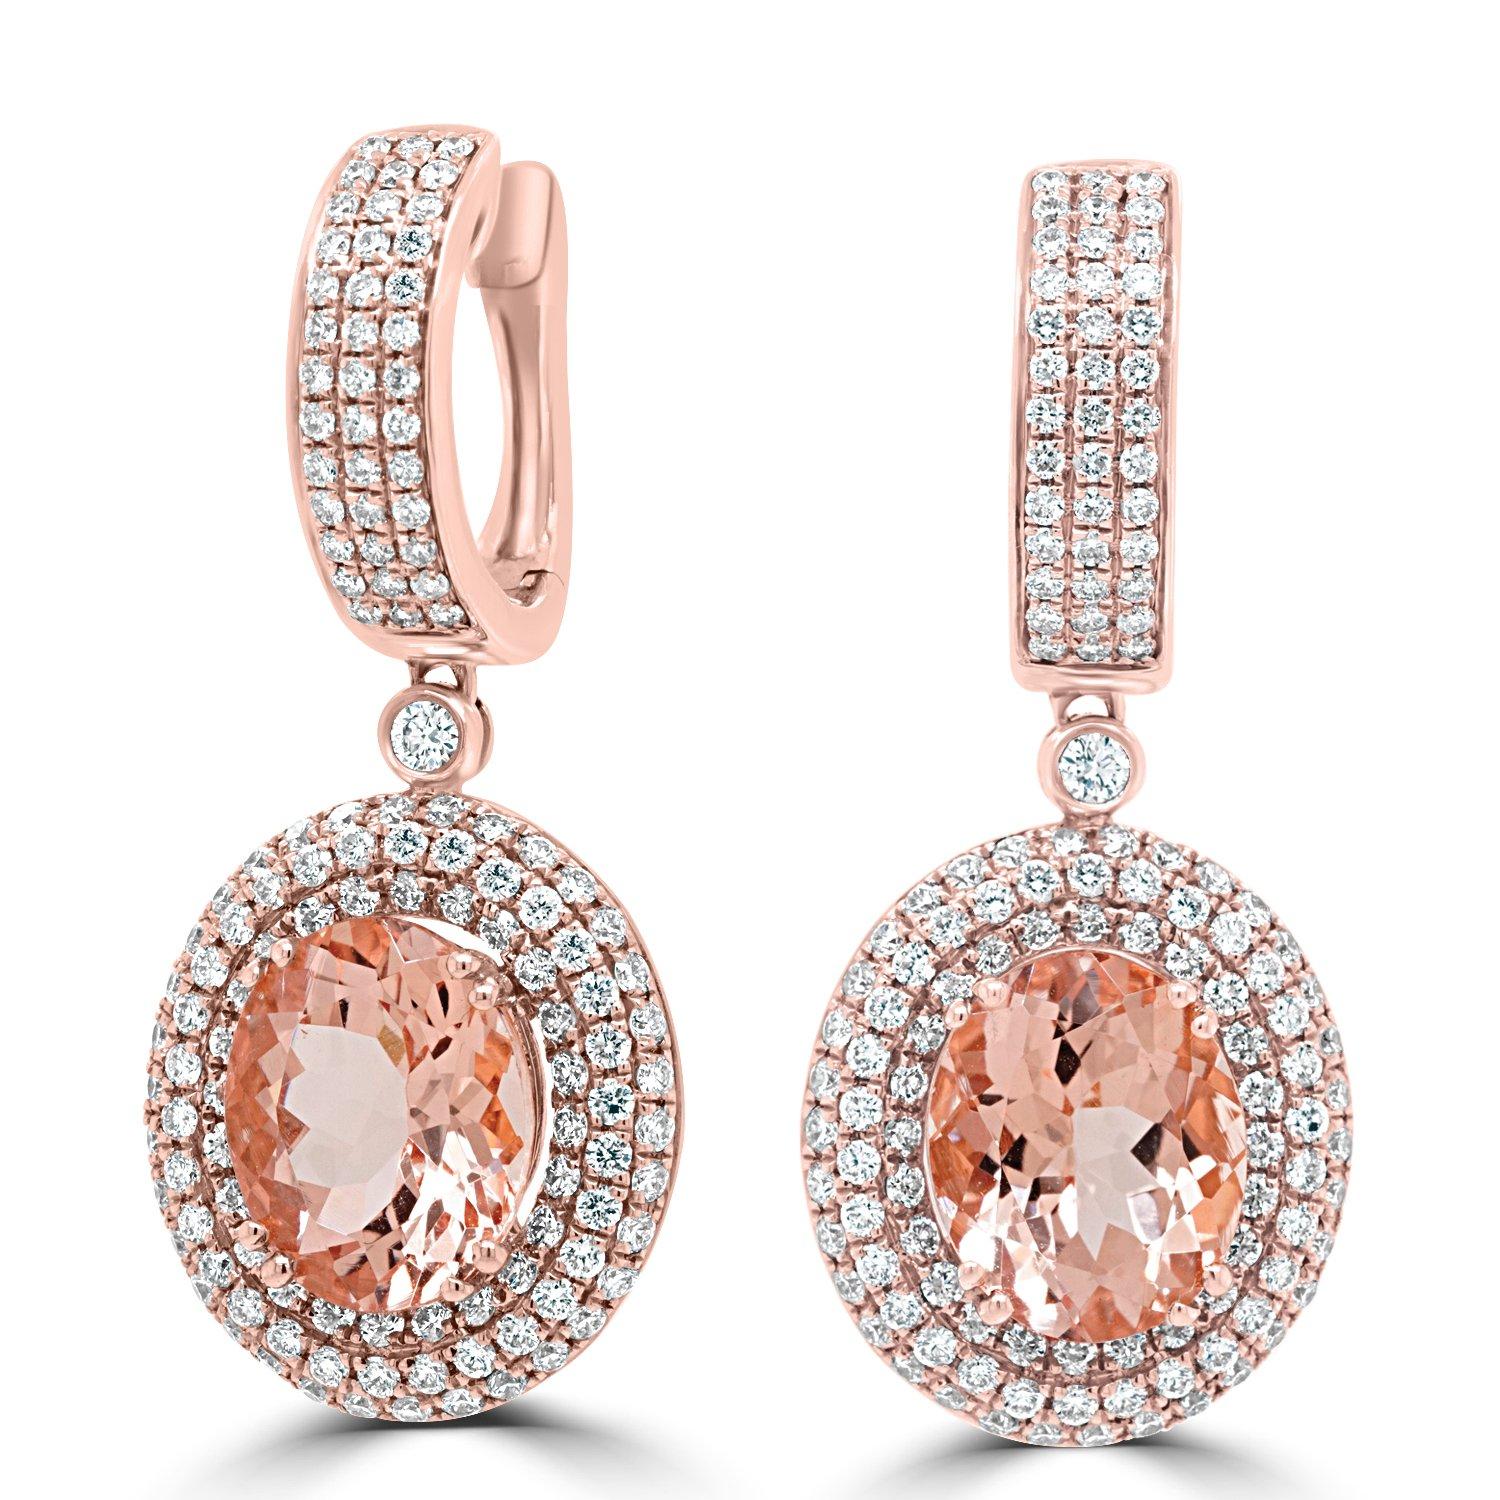 7.02ct Morganite Earring with 1.97ct Diamonds Set in 14K Rose Gold In New Condition For Sale In New York, NY